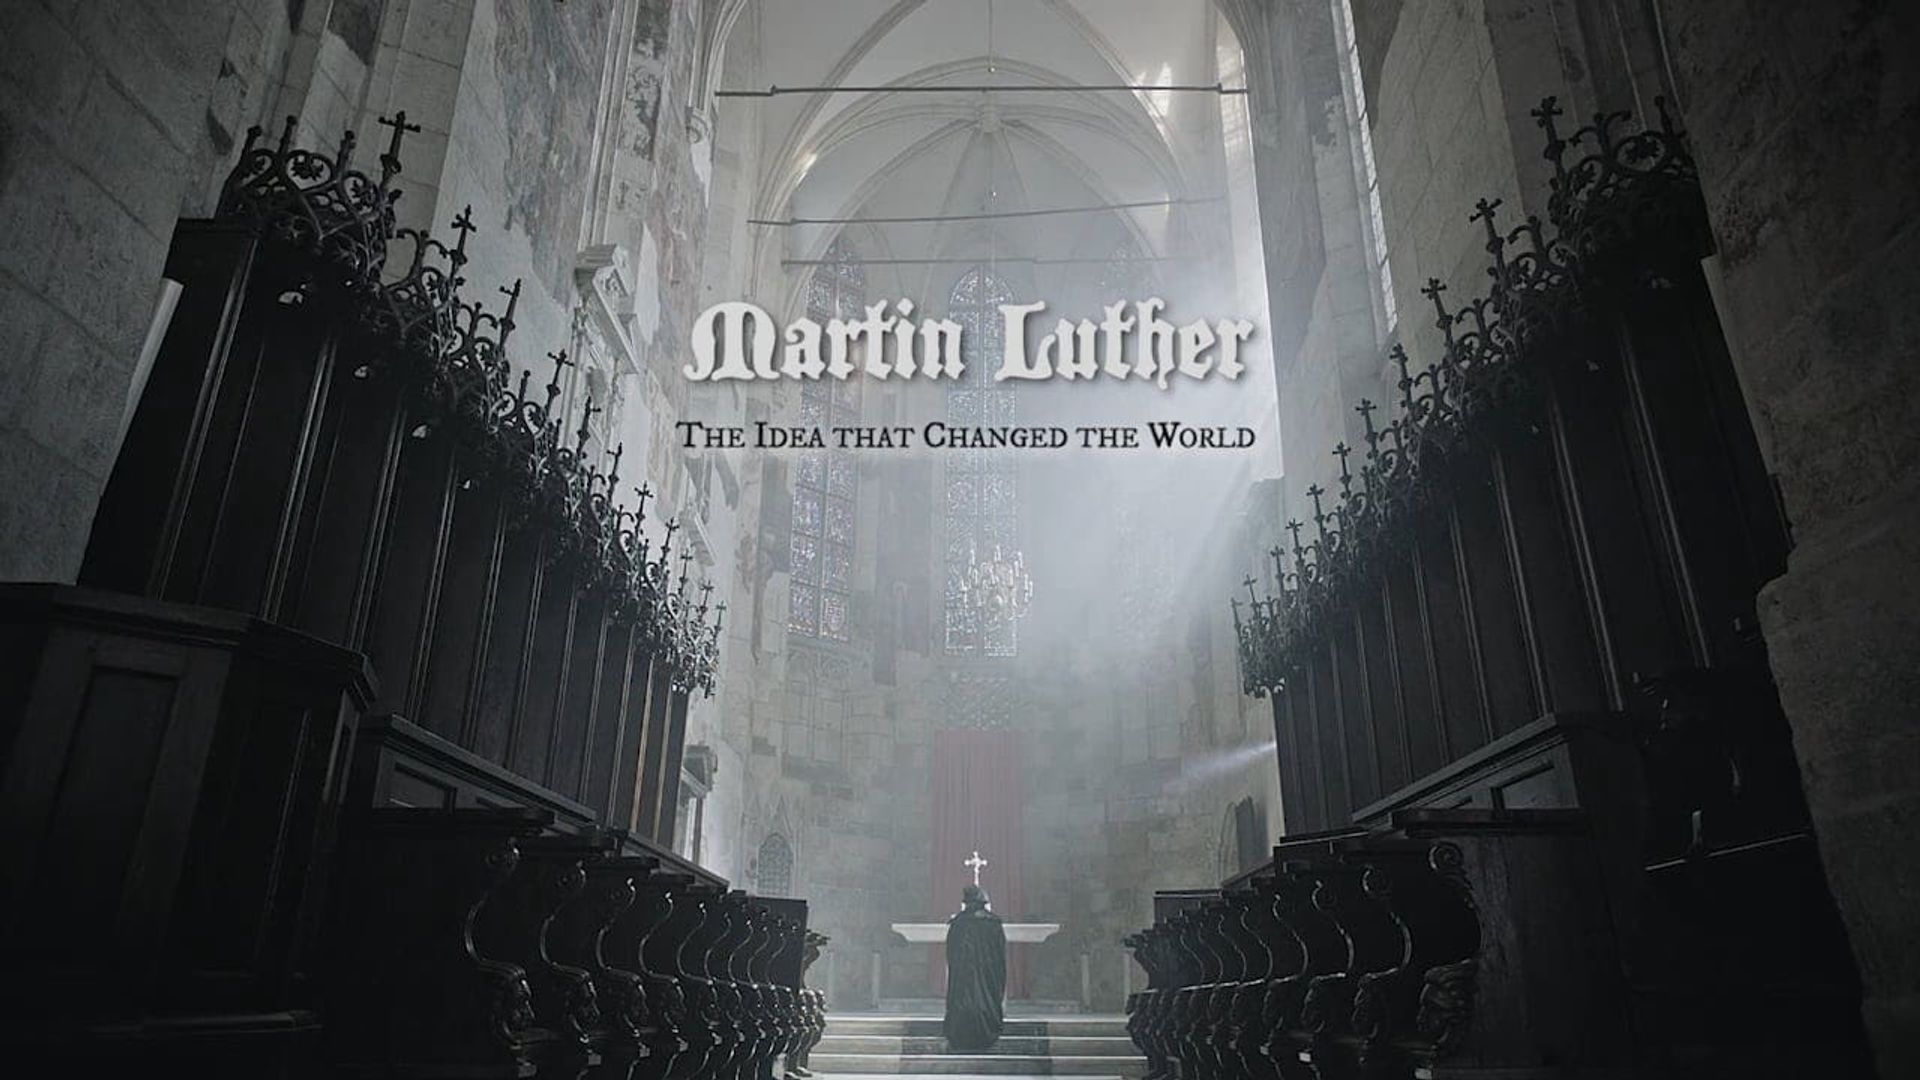 A Return to Grace: Luther's Life and Legacy background